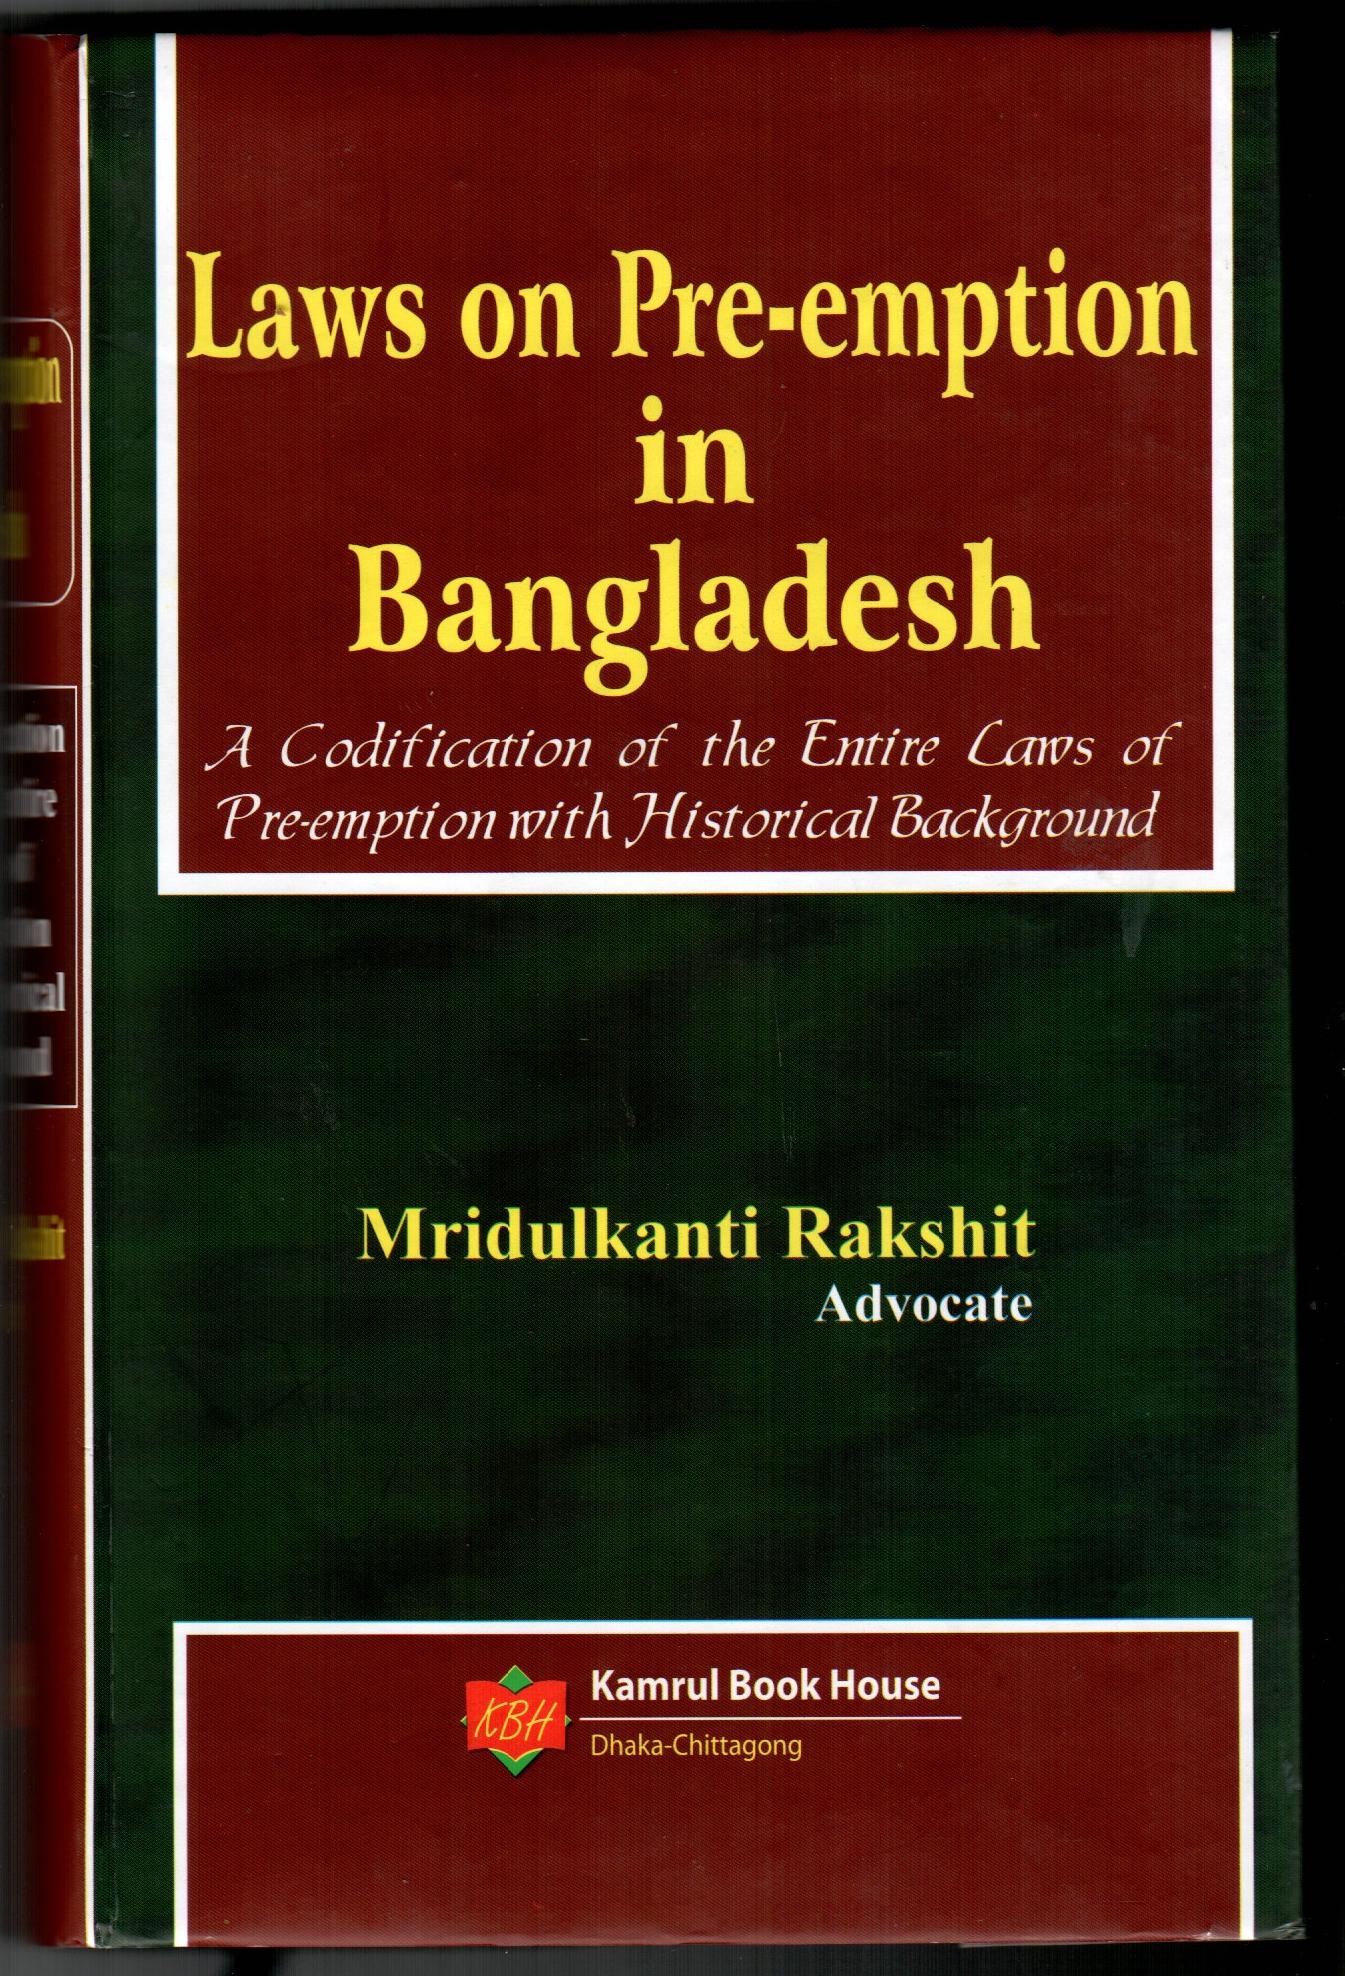 Laws on Pre-emption in Bangladesh